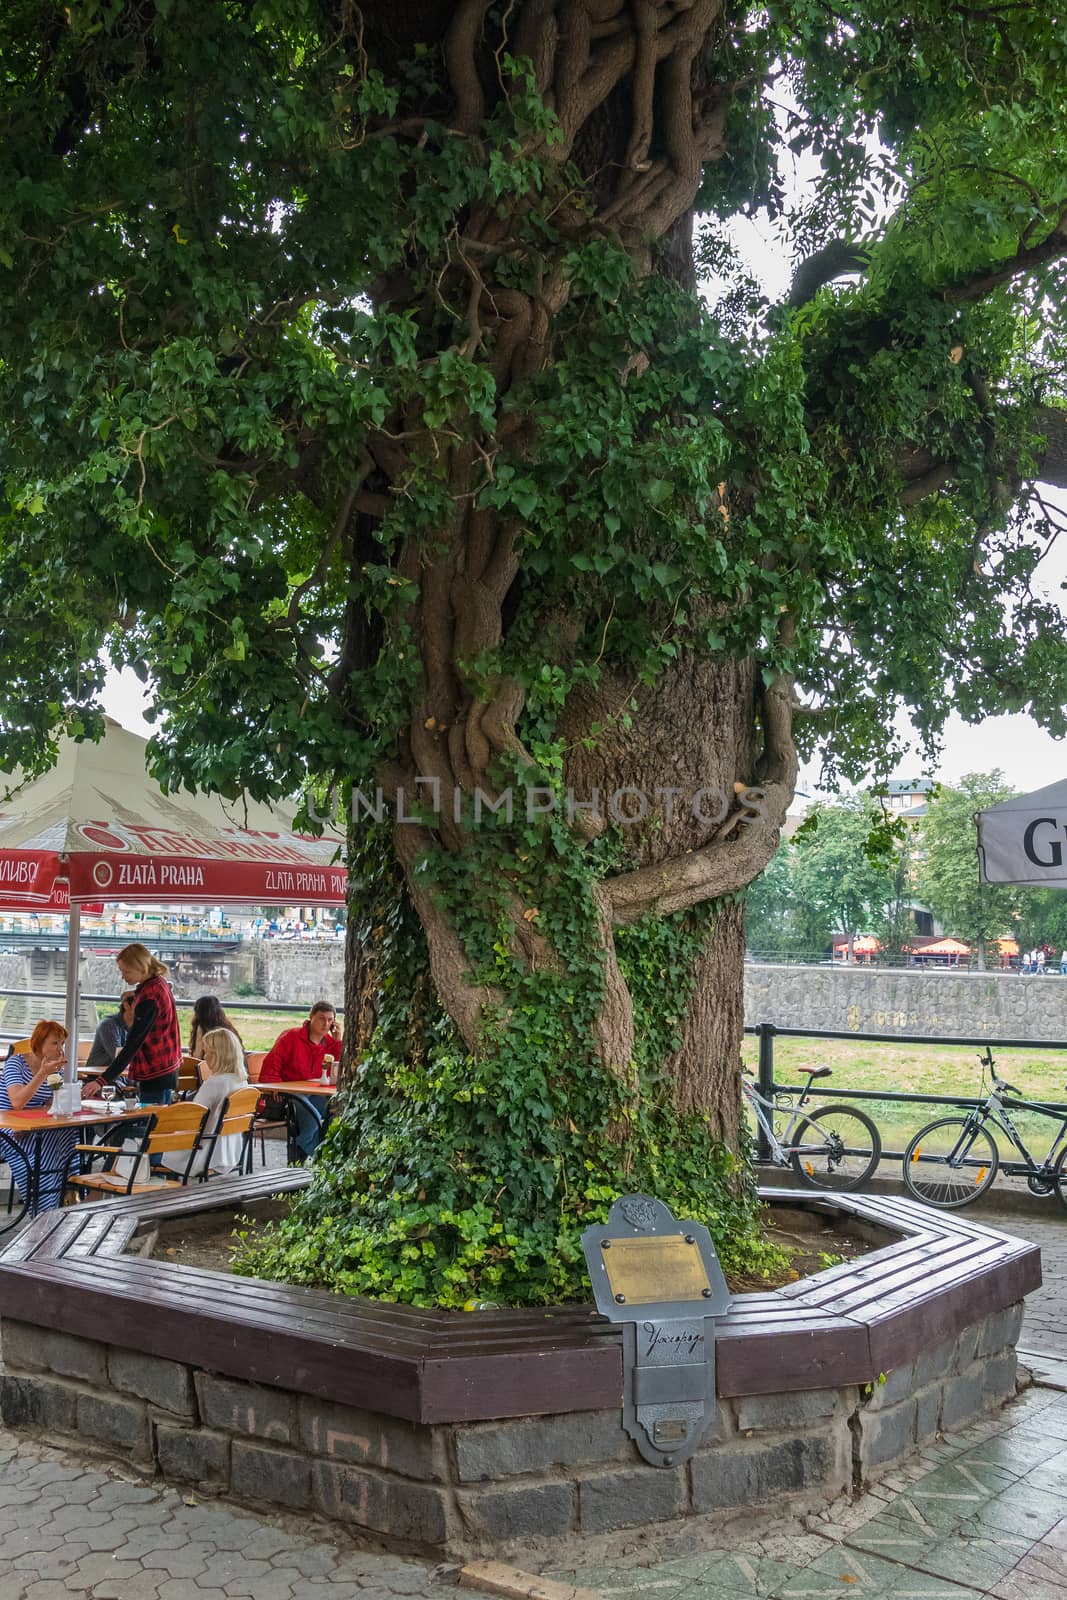 A huge old picturesque tree with an information sign and a circular bench around it